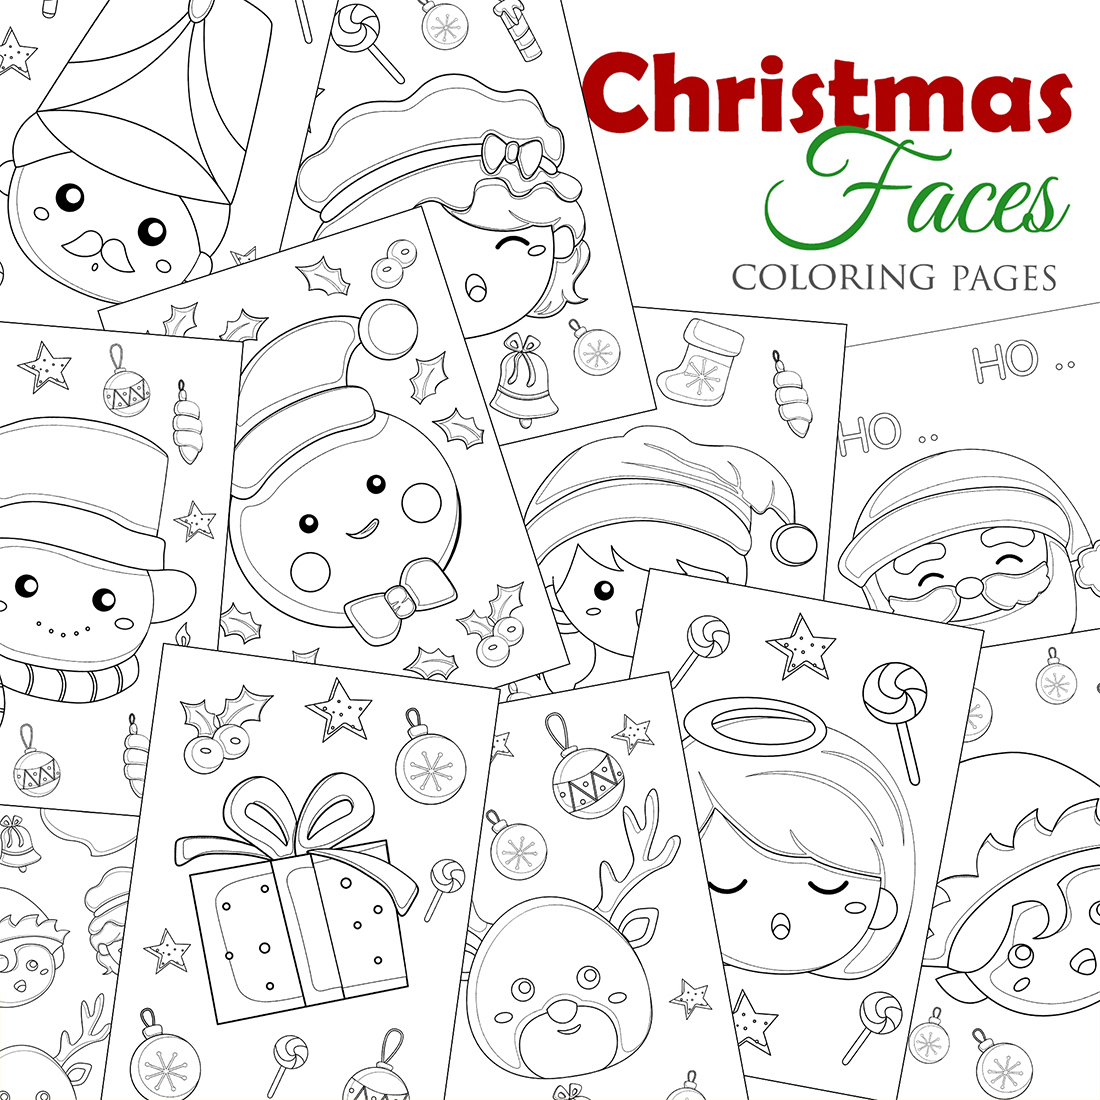 Cute christmas faces elf snowman deer animal girl kids angel cartoon coloring pages for kids and adult